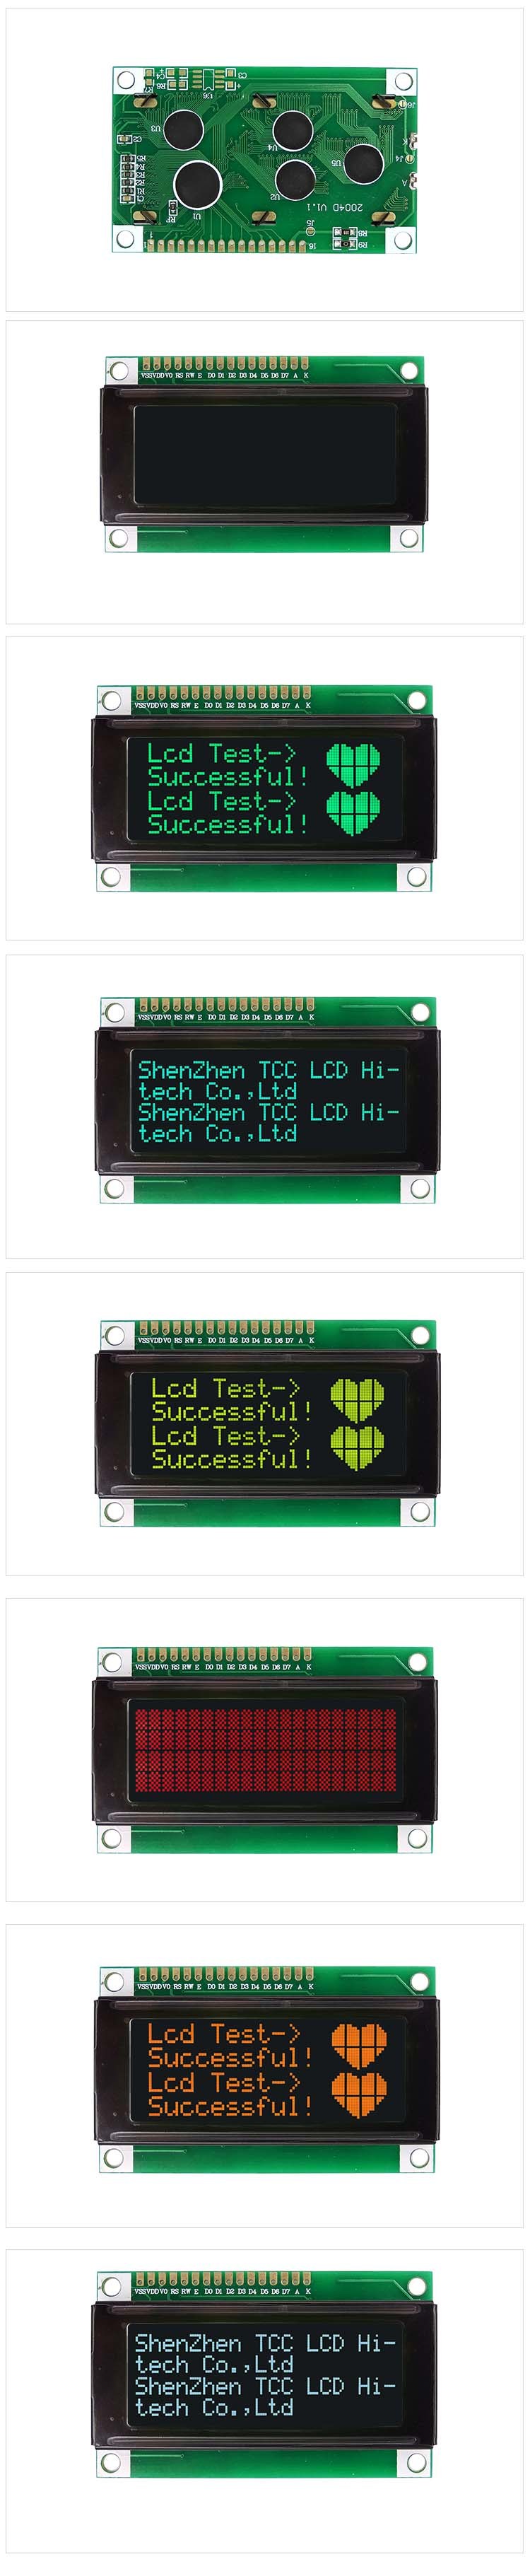 Shenzhen Large Character LCD OLED Display Module 6800 4/8-Bit Parallel Spi 3/4-Wire I2c Serial Screen 20X4 LCD